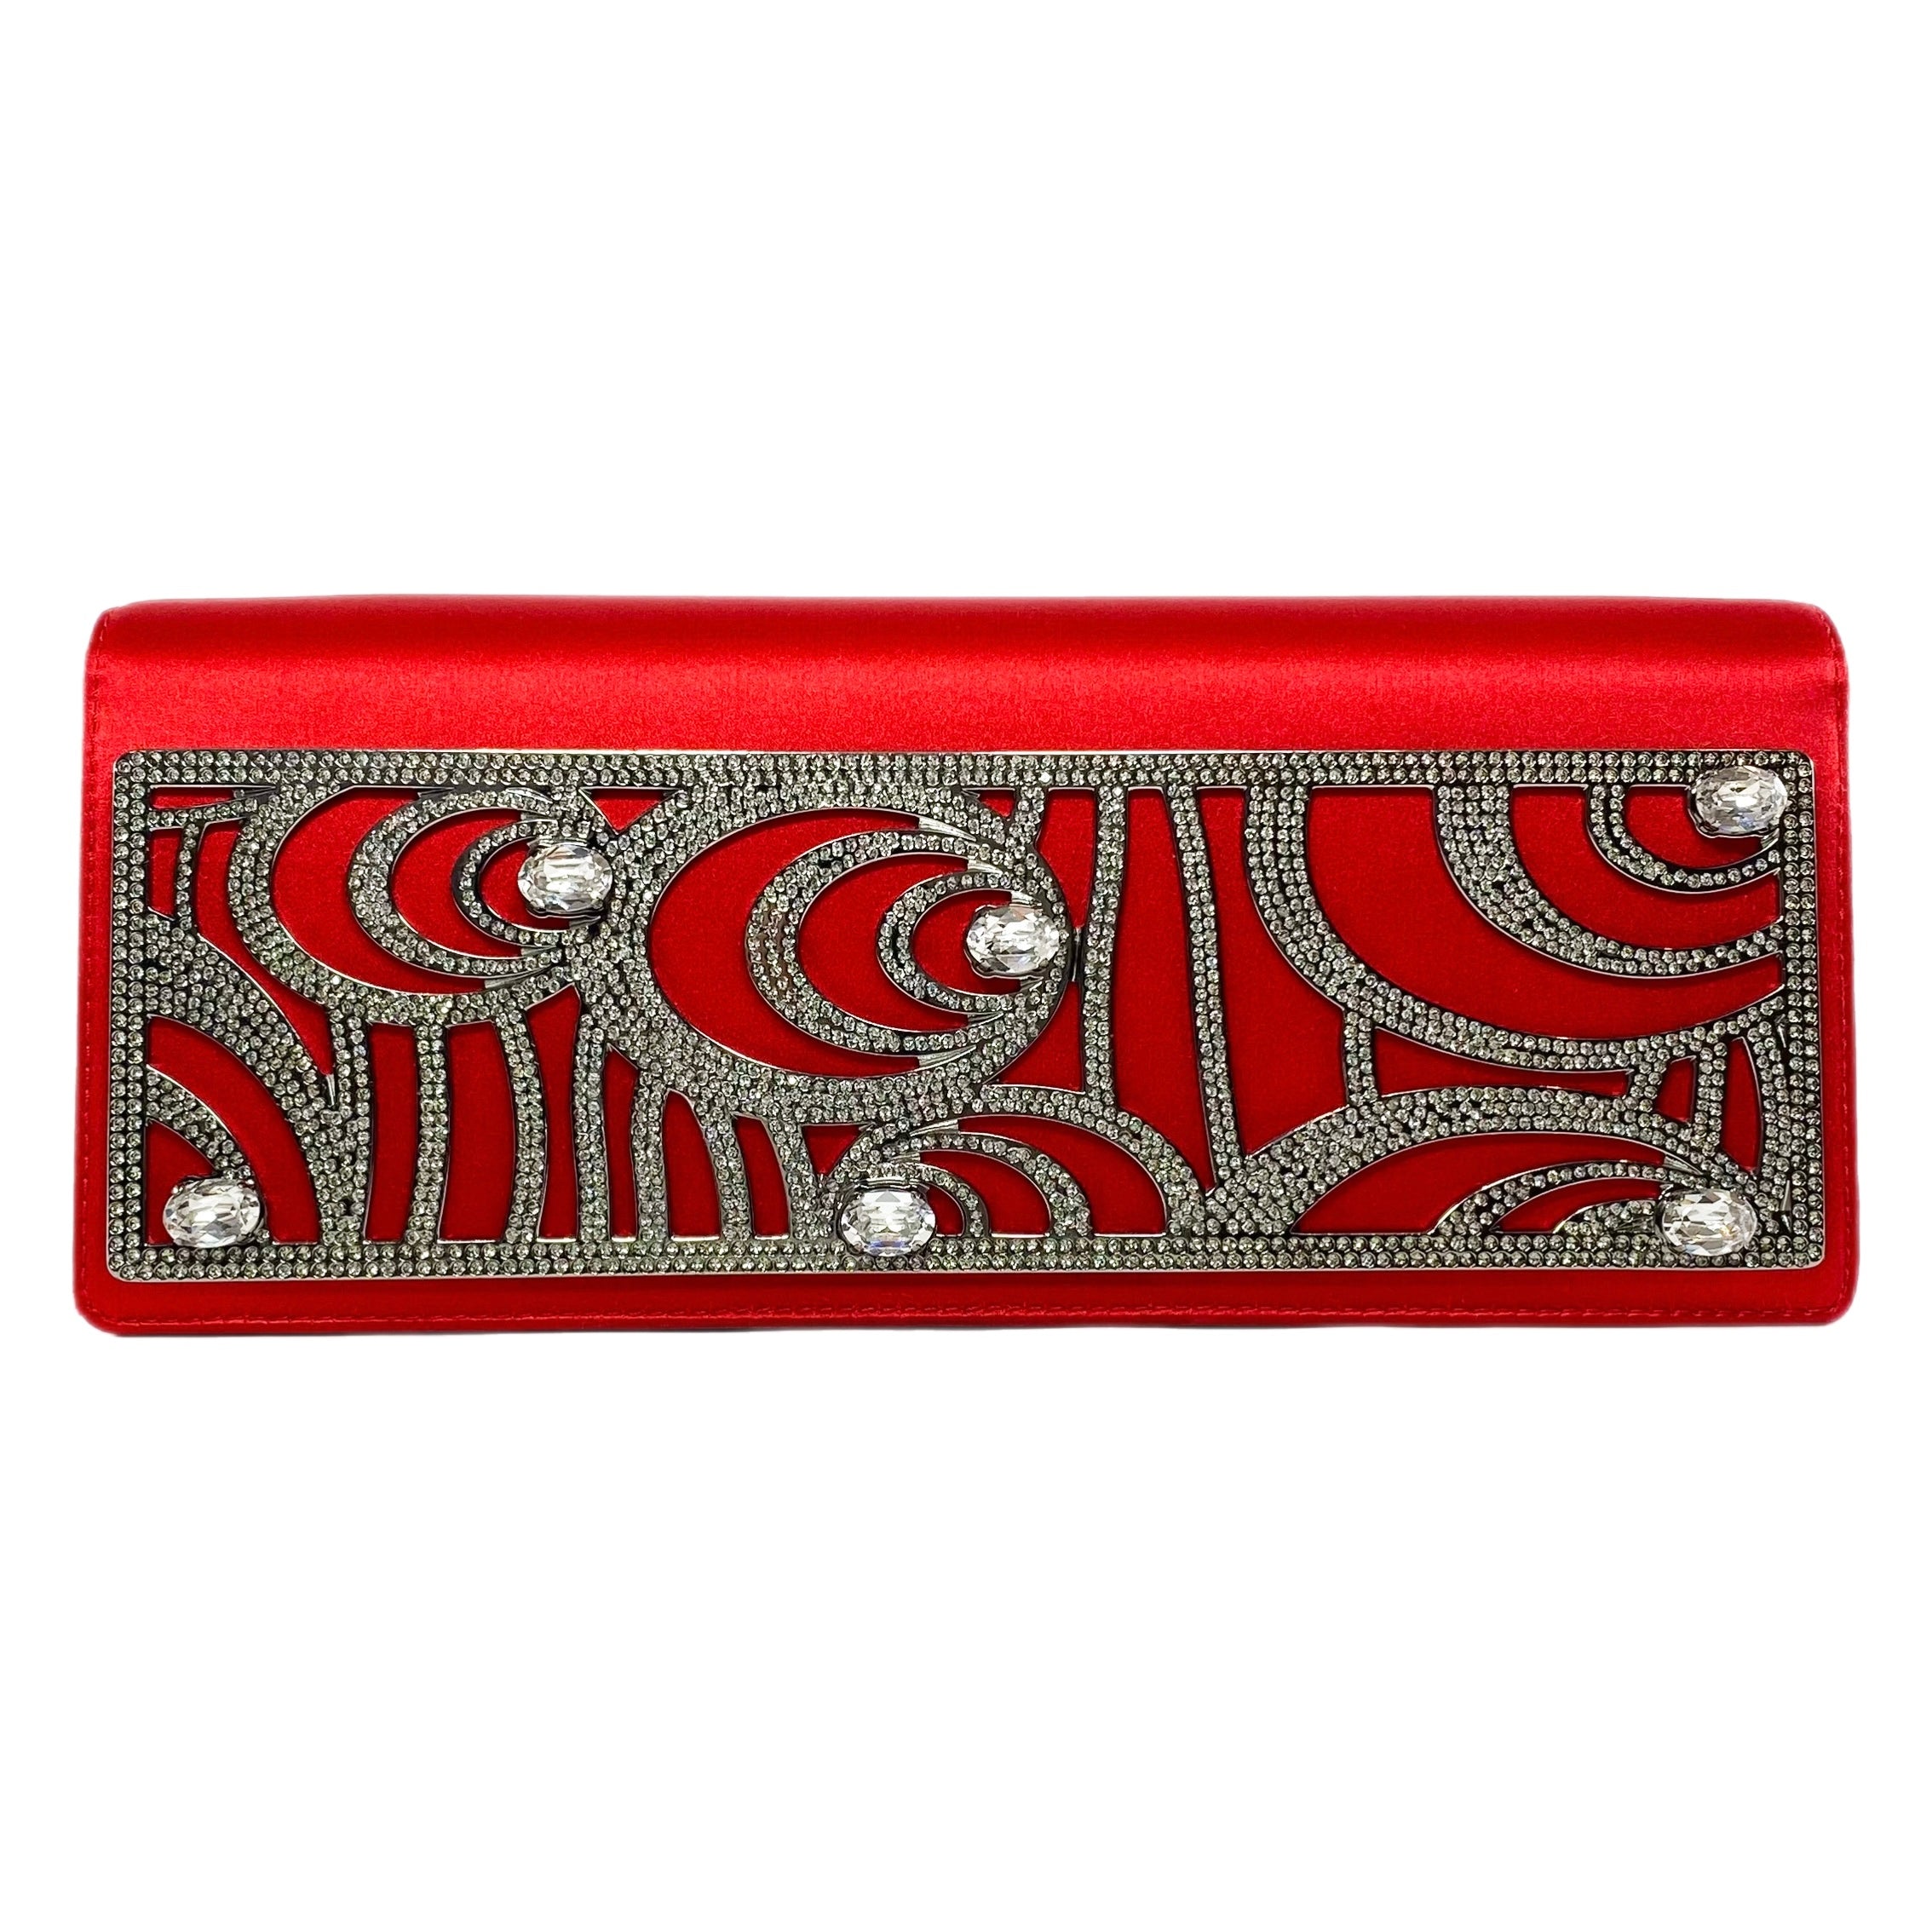 Valentino Red Satin Crystal Embellished Clutch with Chain